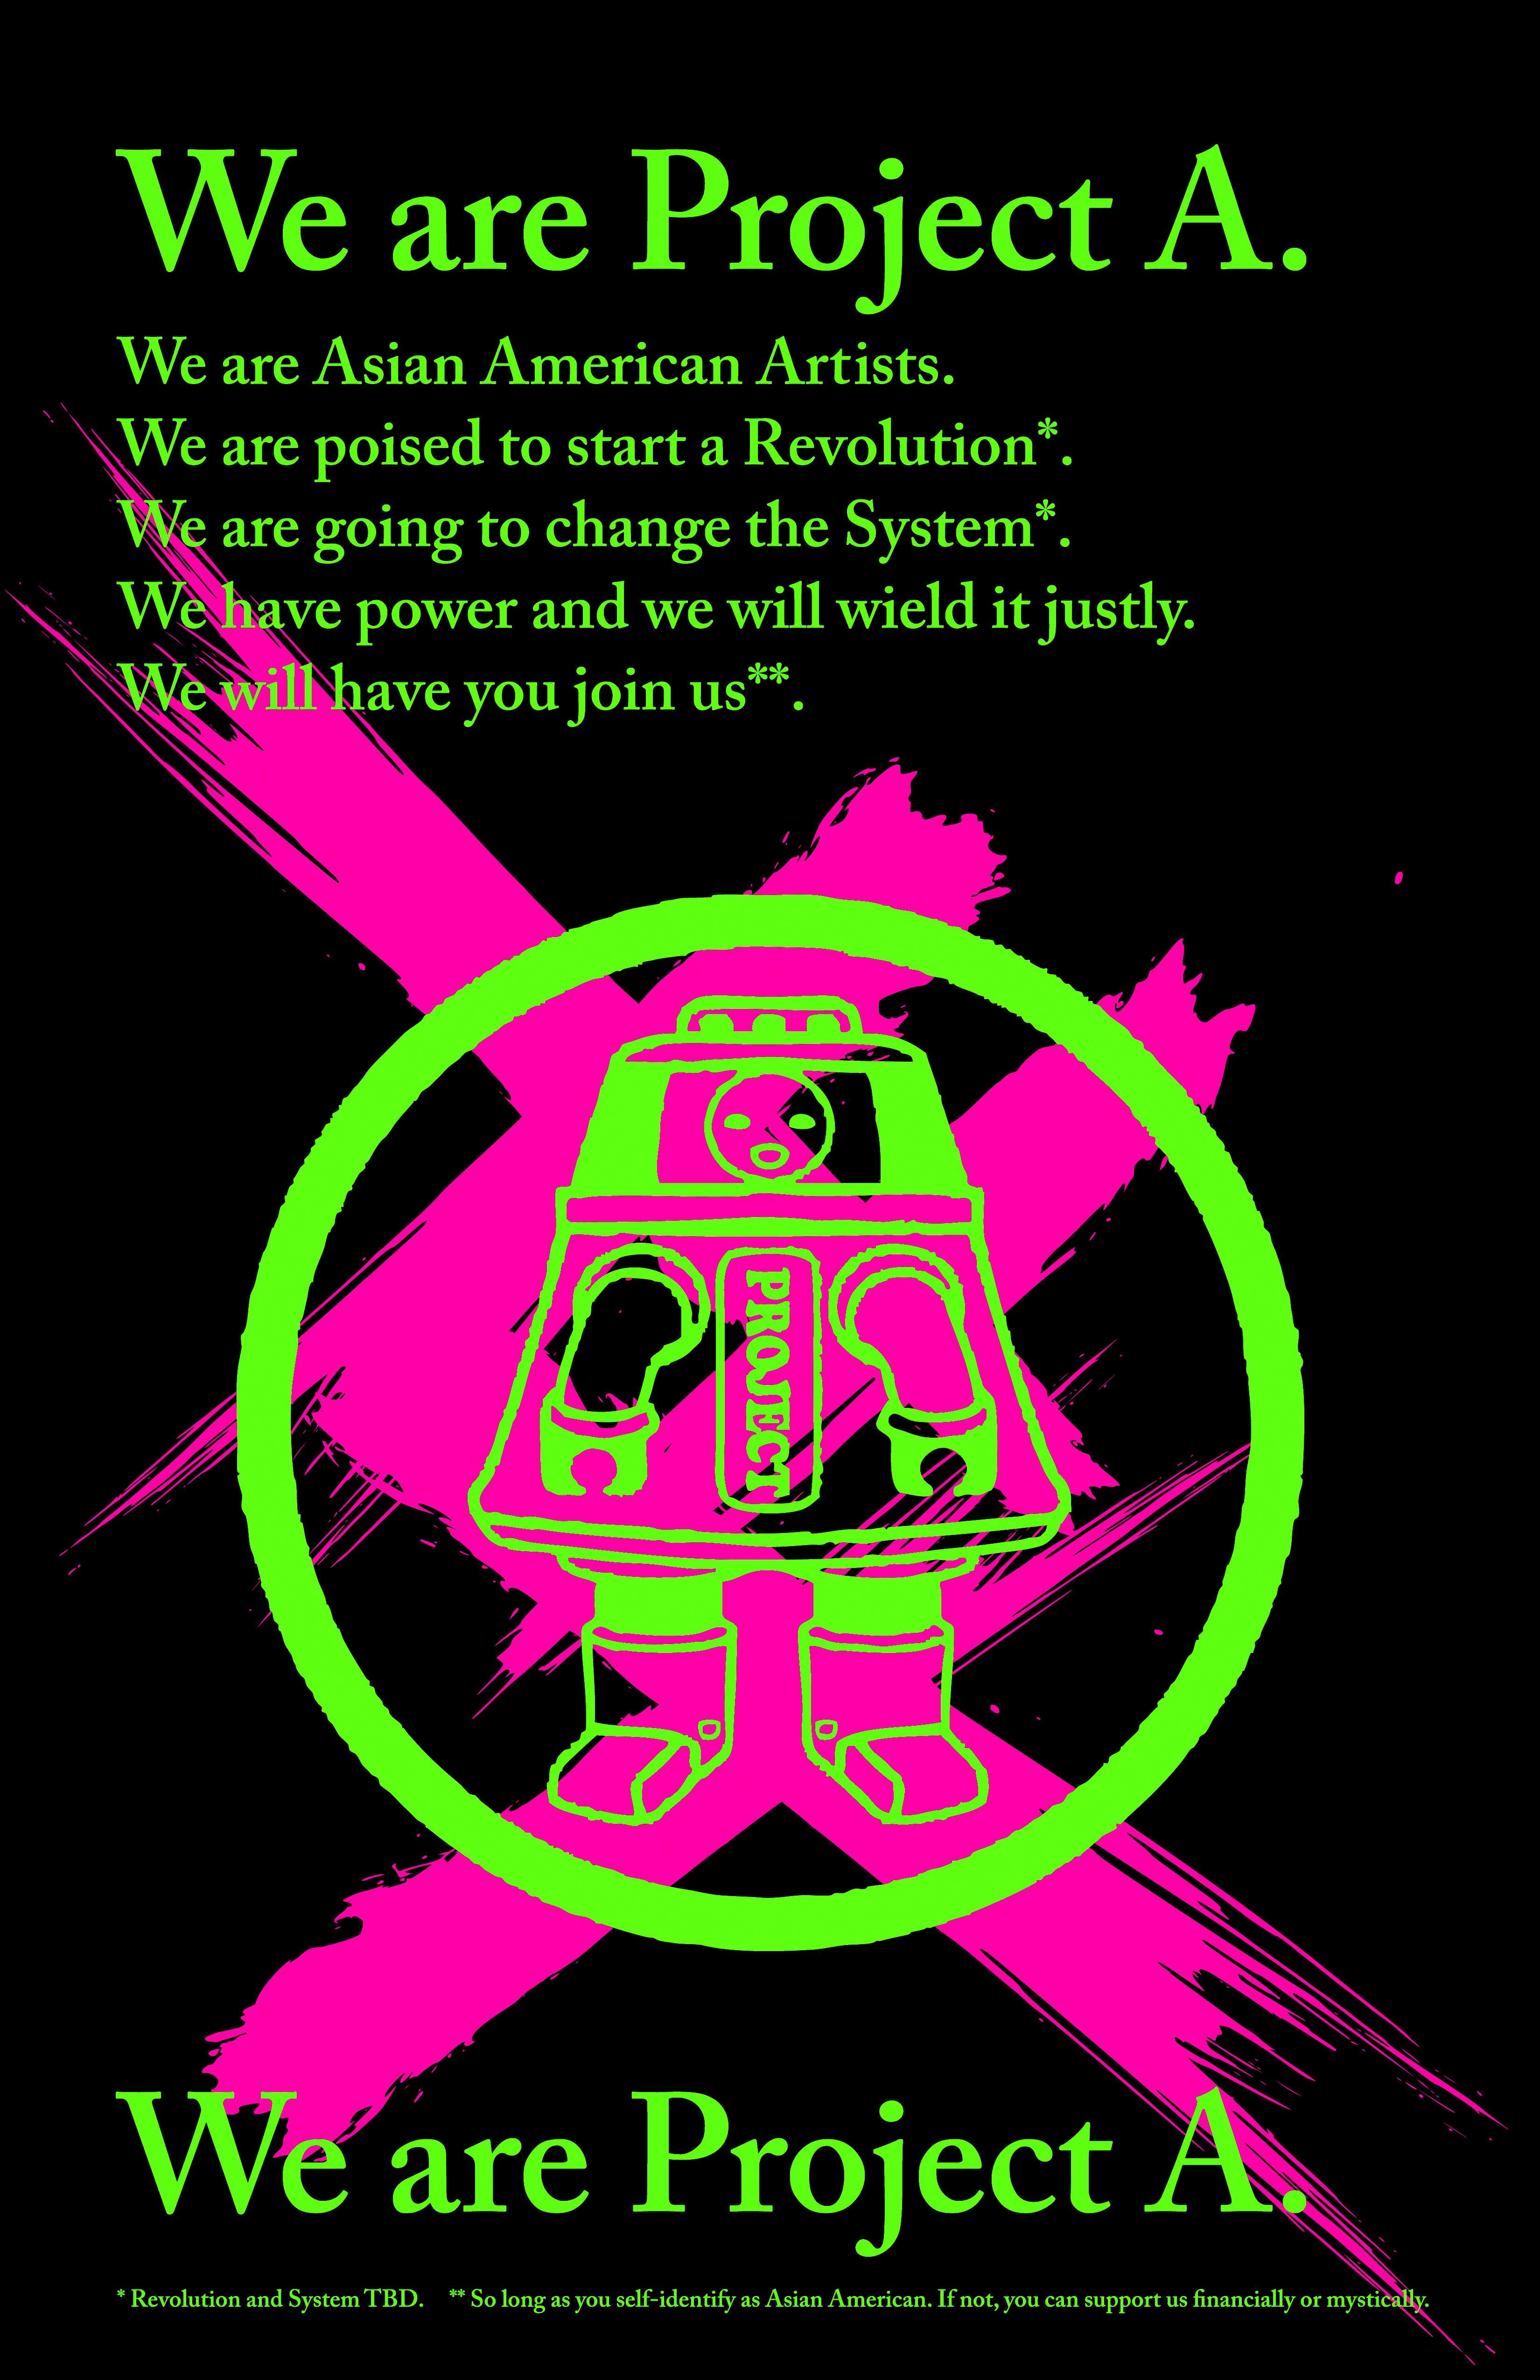 We are Project A poster featuring neon green text against black background with neon pink marks and green robot illustration